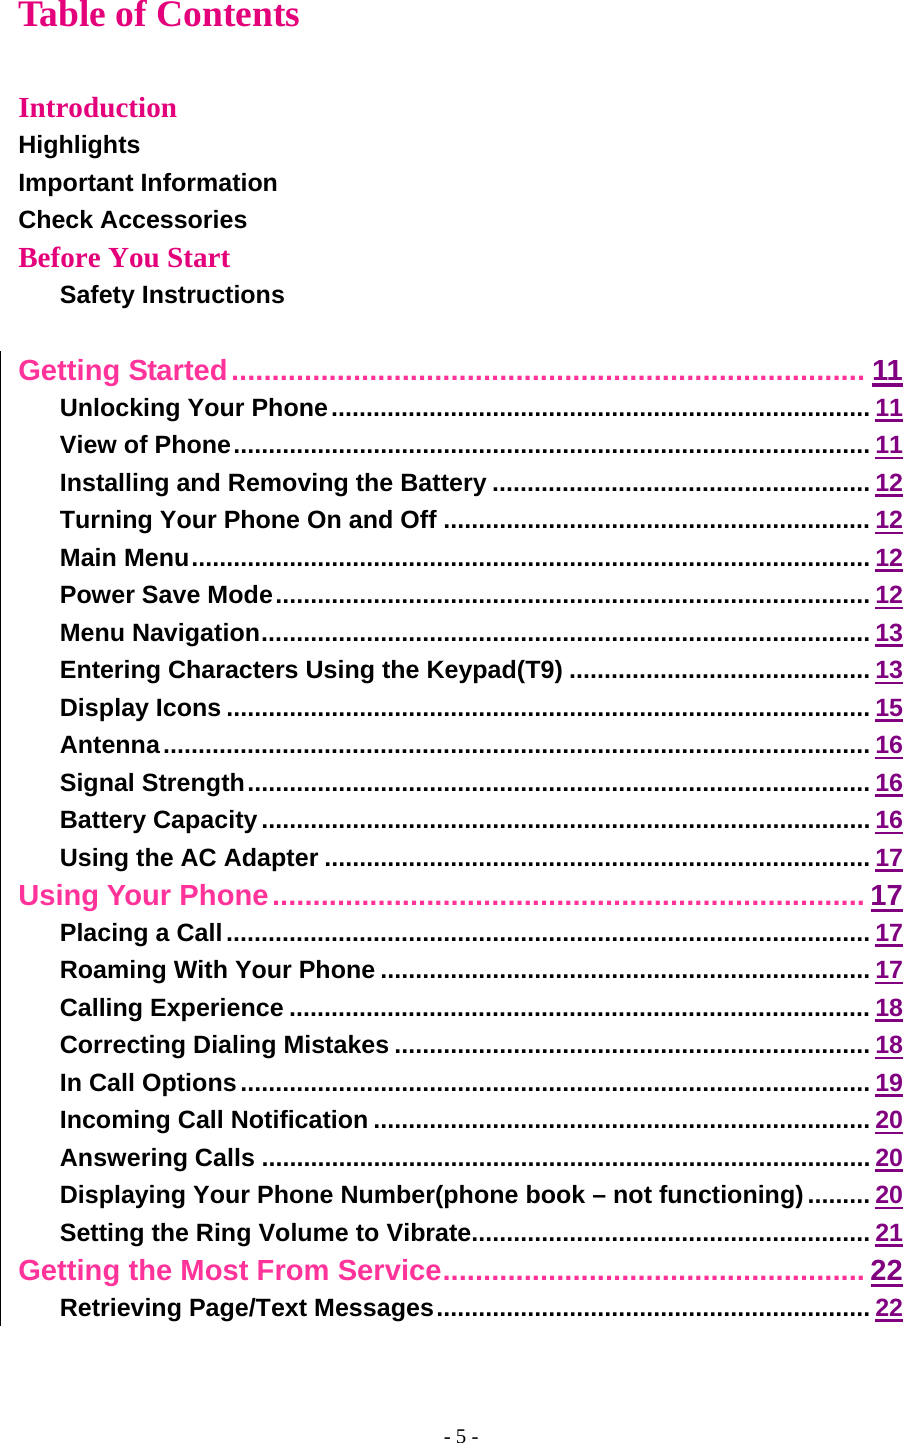 - 5 - Table of Contents  Introduction Highlights Important Information Check Accessories Before You Start Safety Instructions  Getting Started.............................................................................. 11 Unlocking Your Phone............................................................................. 11 View of Phone........................................................................................... 11 Installing and Removing the Battery ...................................................... 12 Turning Your Phone On and Off ............................................................. 12 Main Menu................................................................................................. 12 Power Save Mode..................................................................................... 12 Menu Navigation....................................................................................... 13 Entering Characters Using the Keypad(T9) ........................................... 13 Display Icons ............................................................................................ 15 Antenna..................................................................................................... 16 Signal Strength......................................................................................... 16 Battery Capacity....................................................................................... 16 Using the AC Adapter .............................................................................. 17 Using Your Phone......................................................................... 17 Placing a Call............................................................................................ 17 Roaming With Your Phone ...................................................................... 17 Calling Experience ................................................................................... 18 Correcting Dialing Mistakes .................................................................... 18 In Call Options.......................................................................................... 19 Incoming Call Notification ....................................................................... 20 Answering Calls ....................................................................................... 20 Displaying Your Phone Number(phone book – not functioning)......... 20 Setting the Ring Volume to Vibrate......................................................... 21 Getting the Most From Service.................................................... 22 Retrieving Page/Text Messages.............................................................. 22 